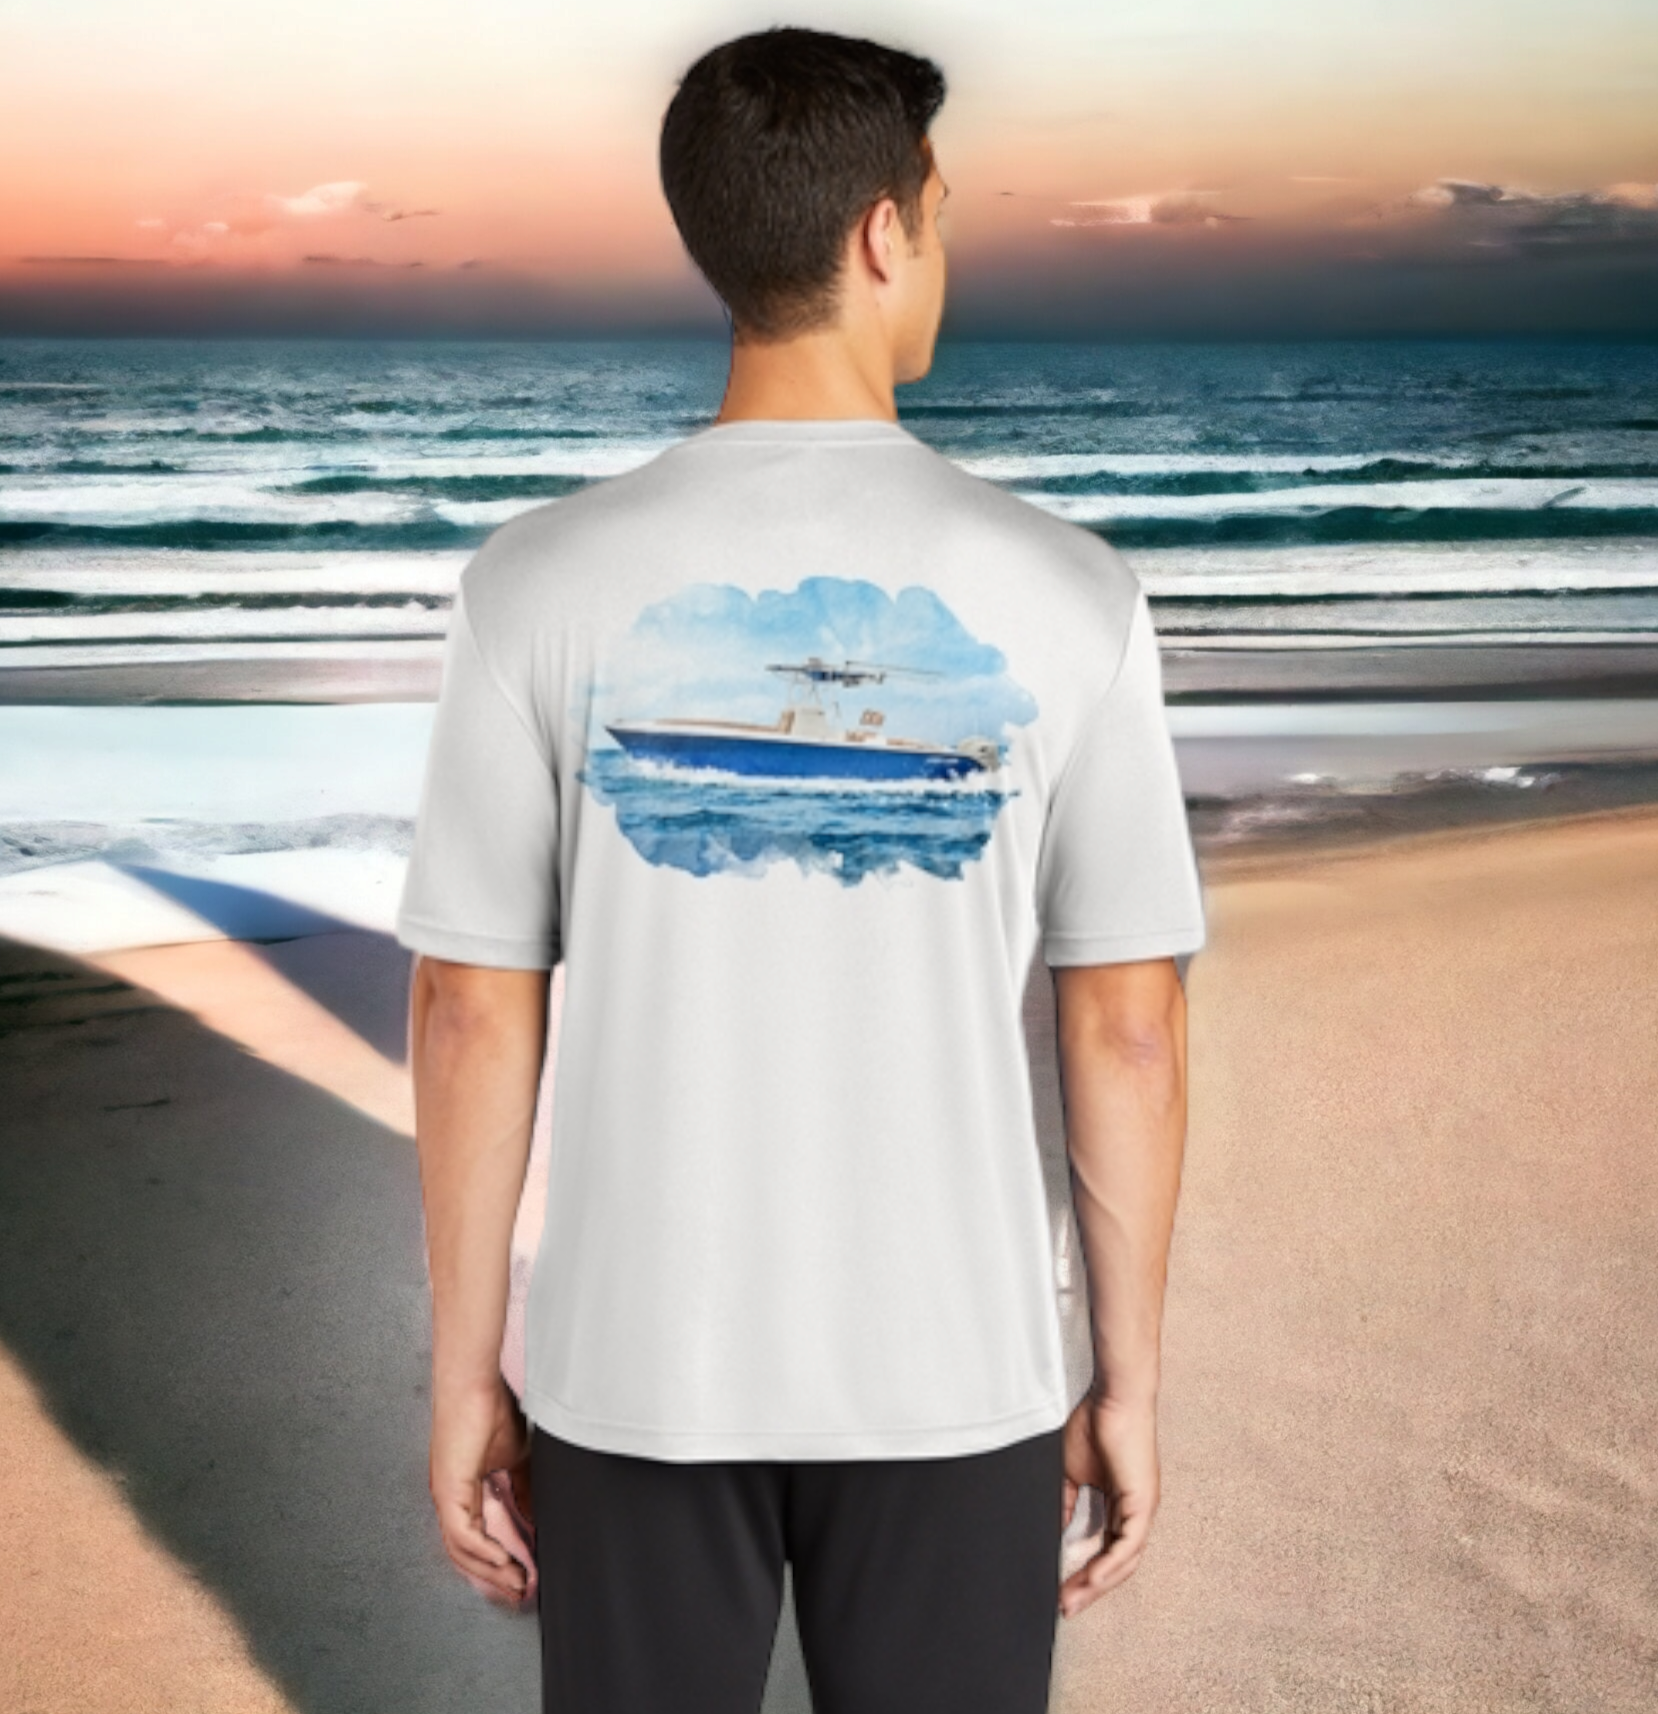 Dri-FIT Custom Boat Shirts - Long Sleeve: Customized Apparel for Boaters Medium / Silver / Yes (add Order #in Notes Section of Cart)